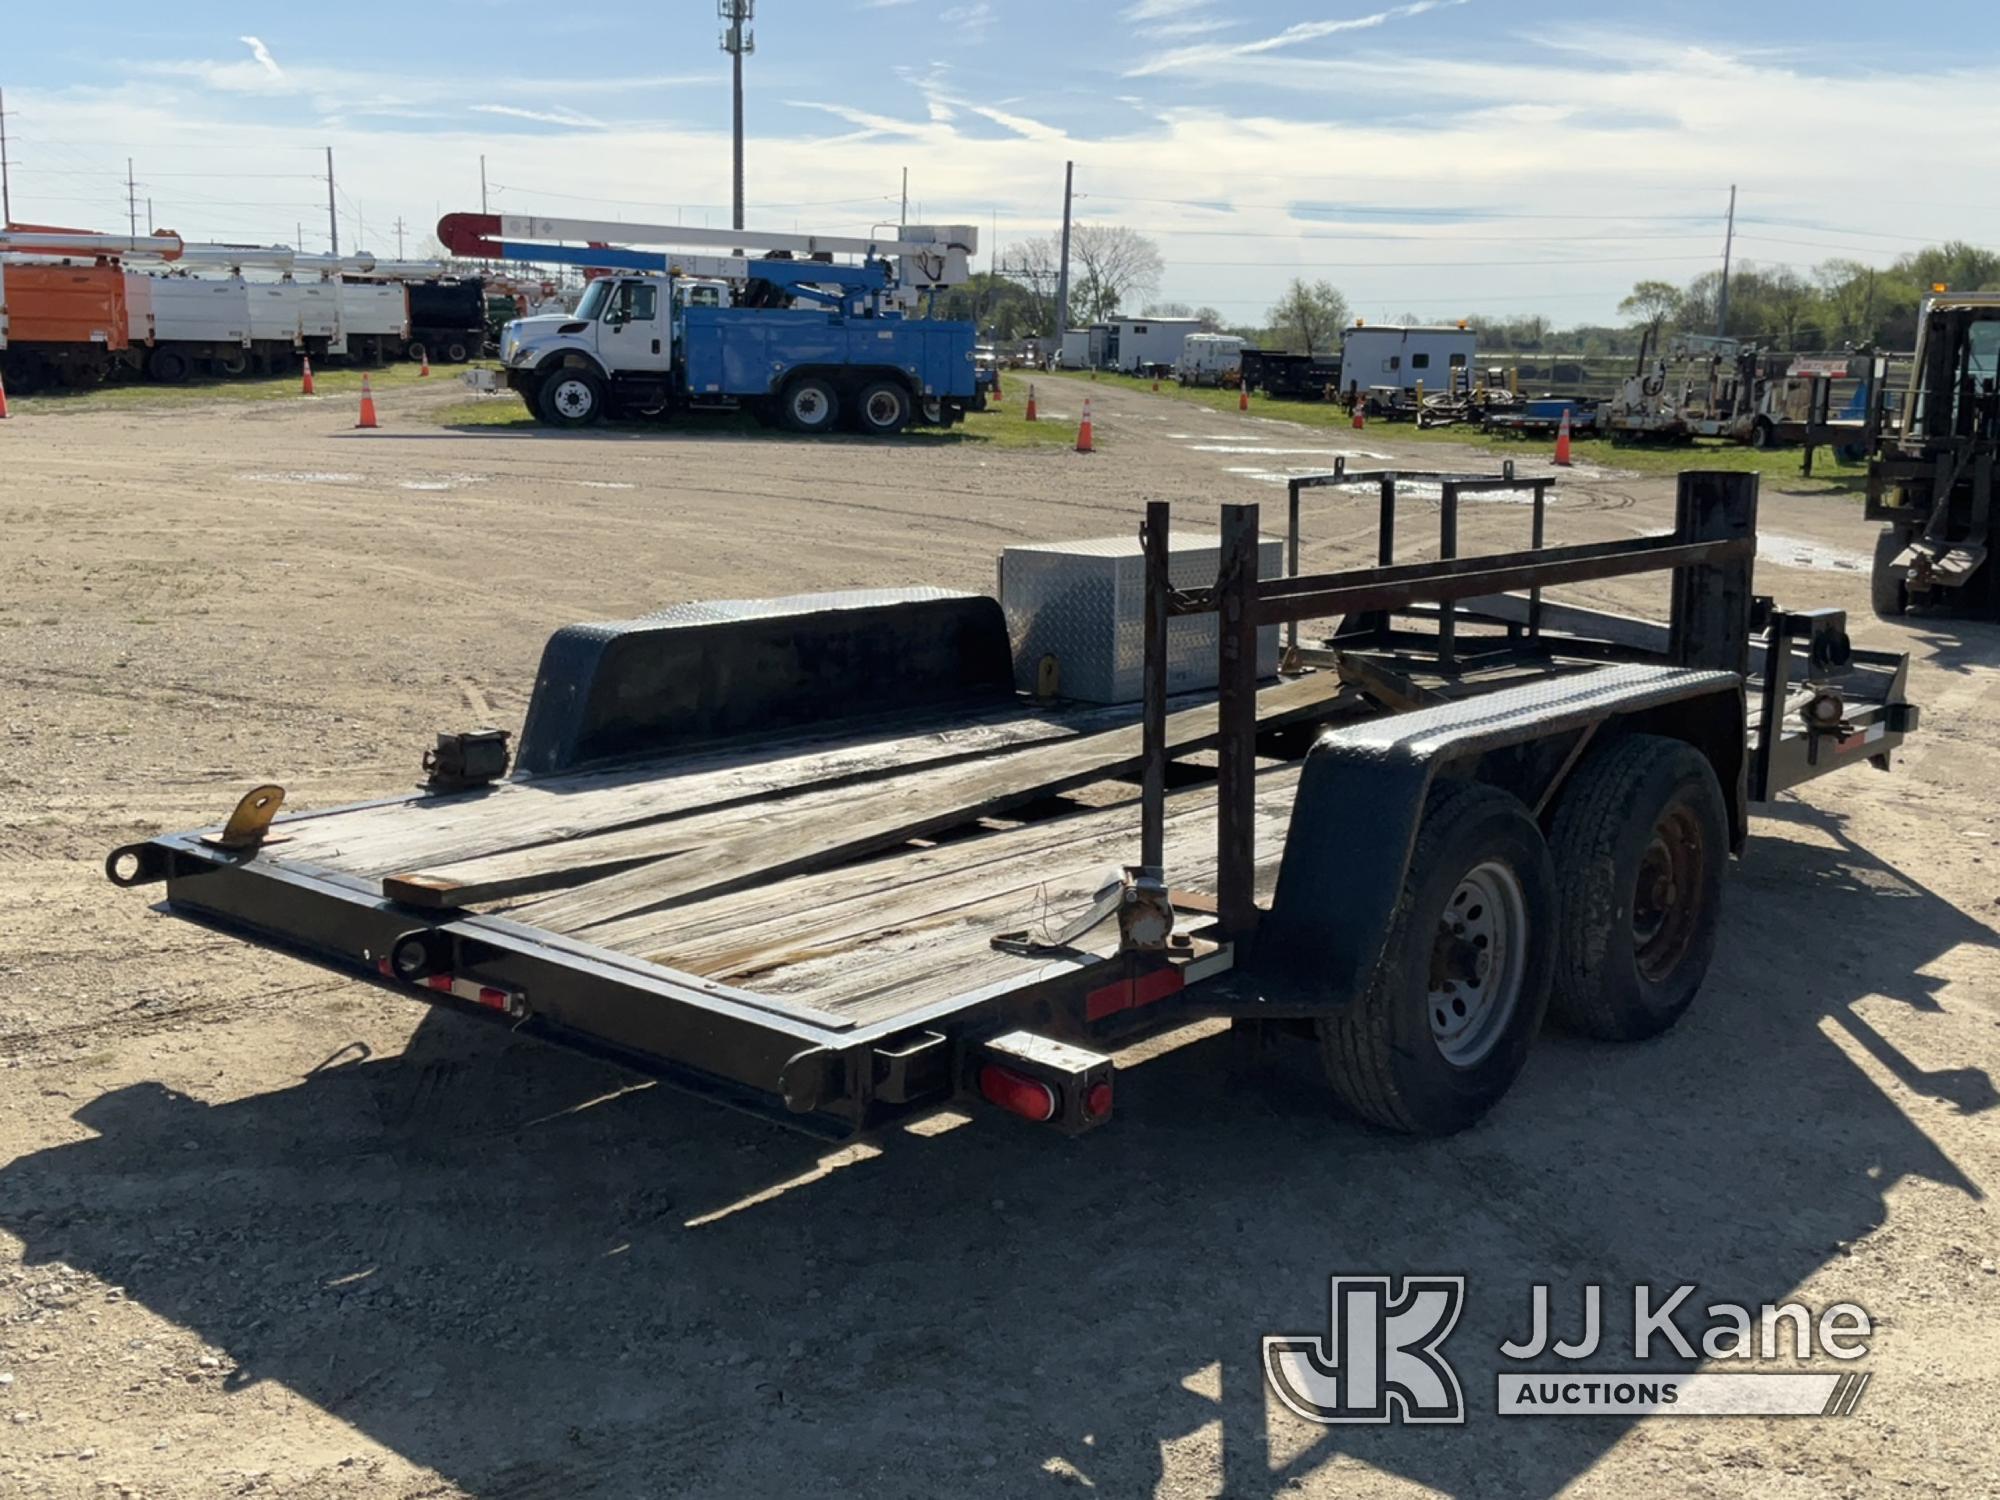 (Charlotte, MI) 2005 Brim T/A Tagalong Flatbed Trailer Rotted Deck Boards